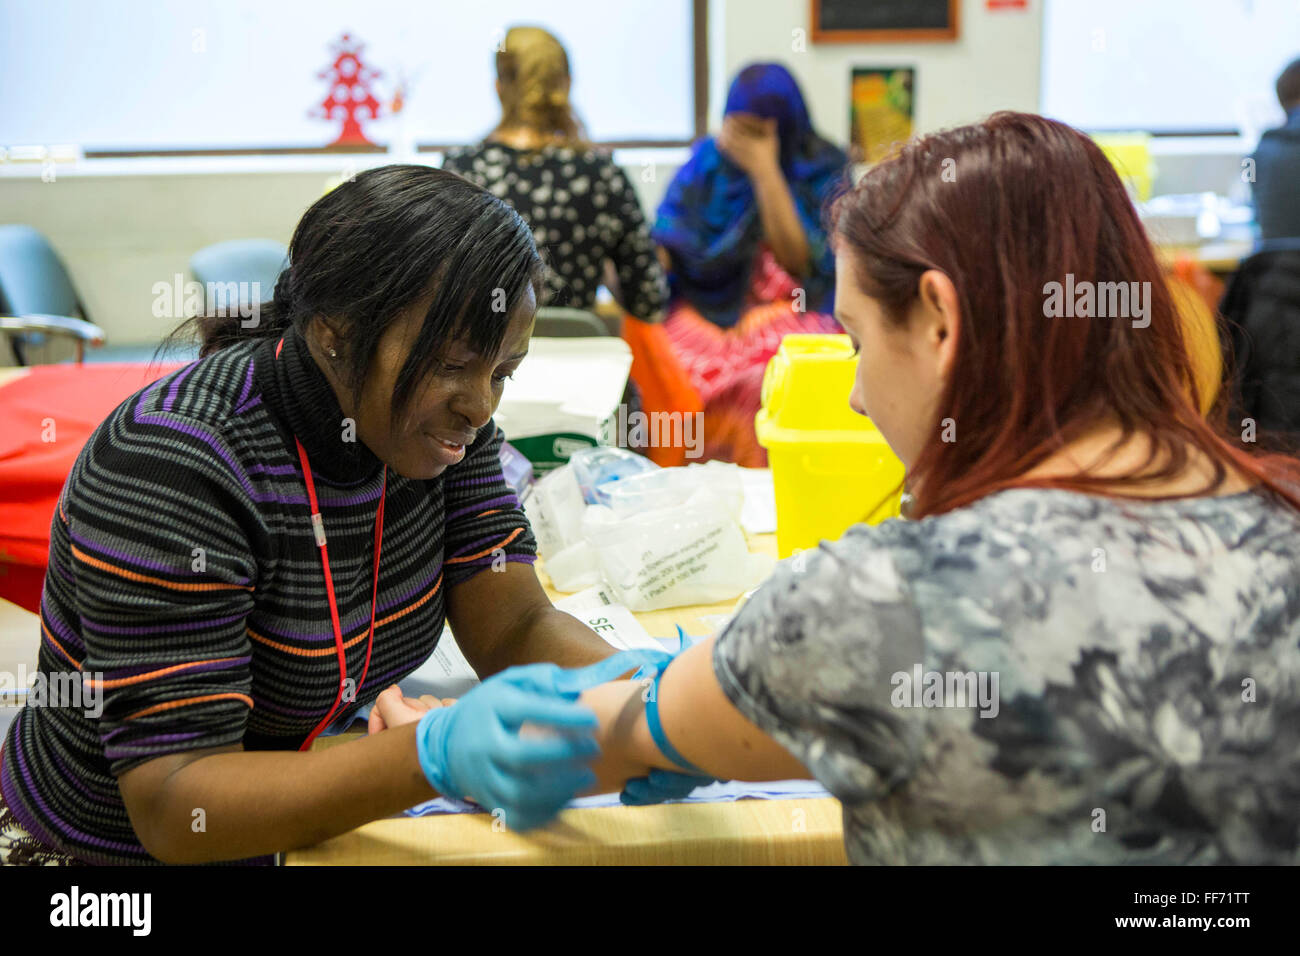 A tuberculosis contact tracing nurse prepares a young females arm for a blood test.  This is part of public health screening event in response from some recent TB cases being diagnosed in a homeless hostel in central London, UK. Stock Photo